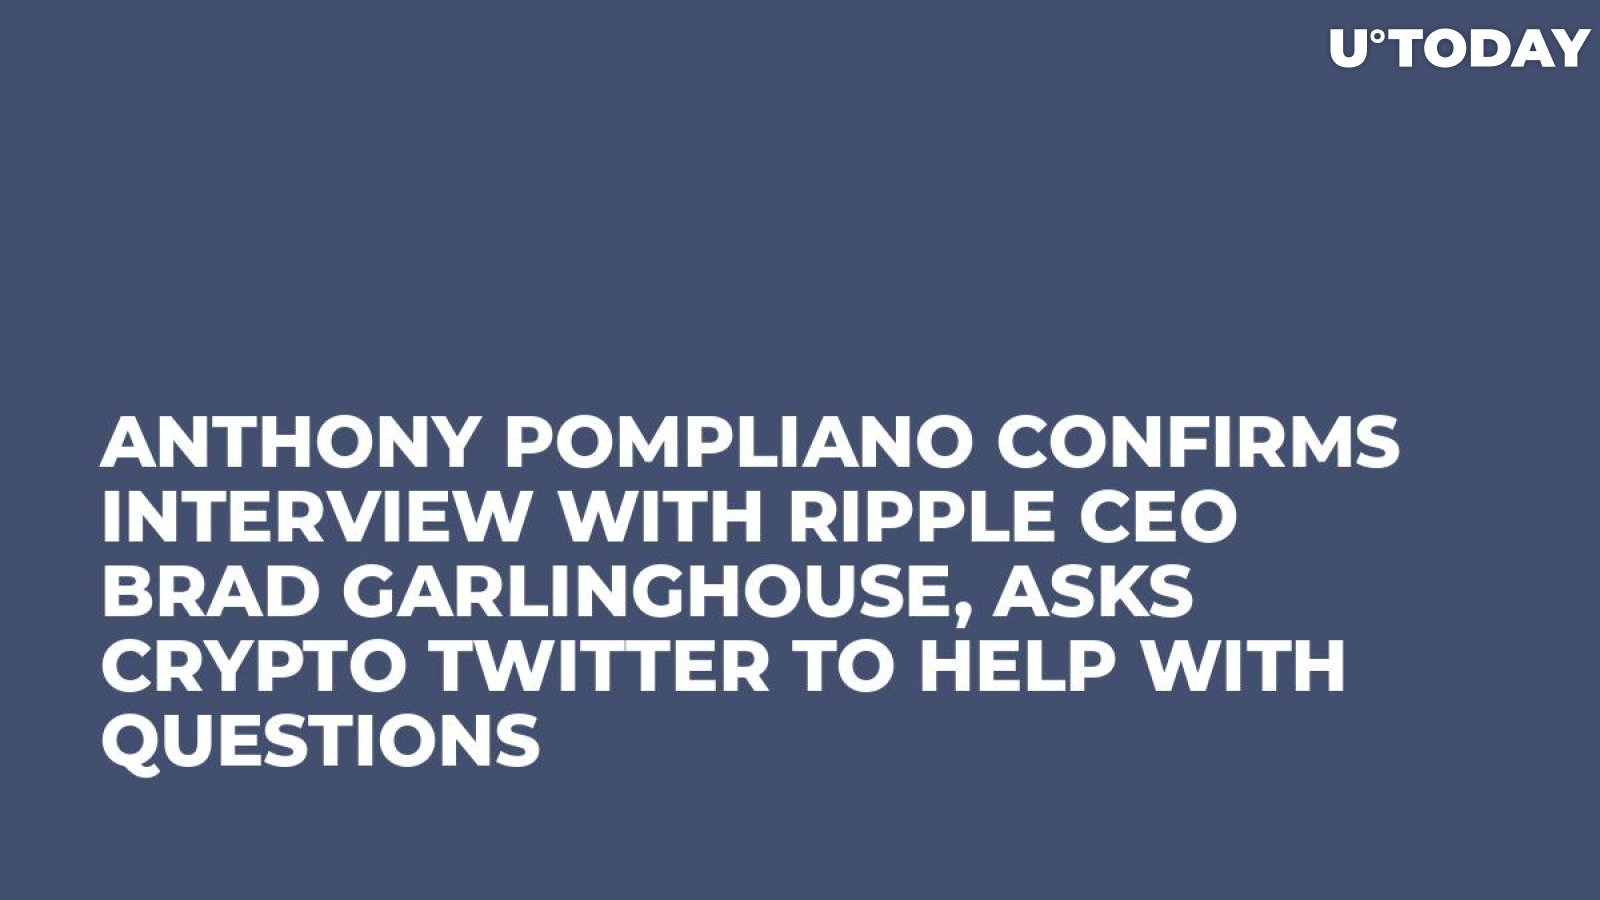 Anthony Pompliano Confirms Interview with Ripple CEO Brad Garlinghouse, Asks Crypto Twitter to Help with Questions